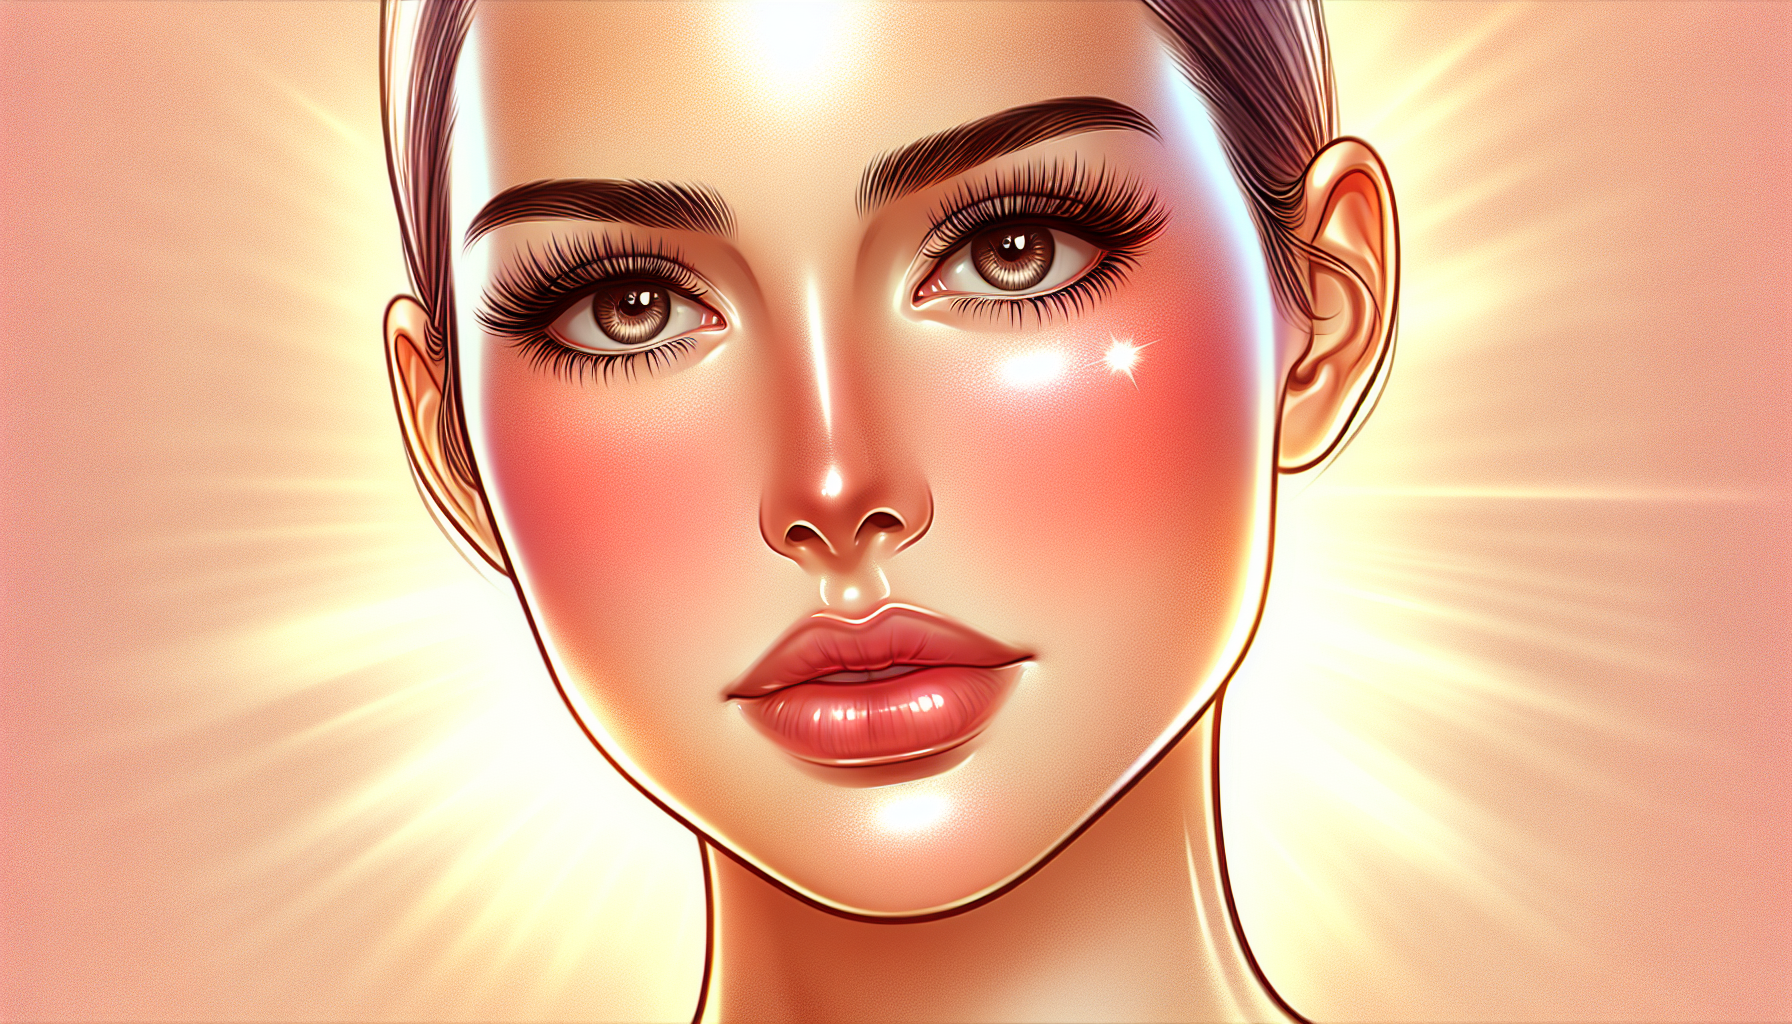 Illustration of a youthful complexion with smooth skin